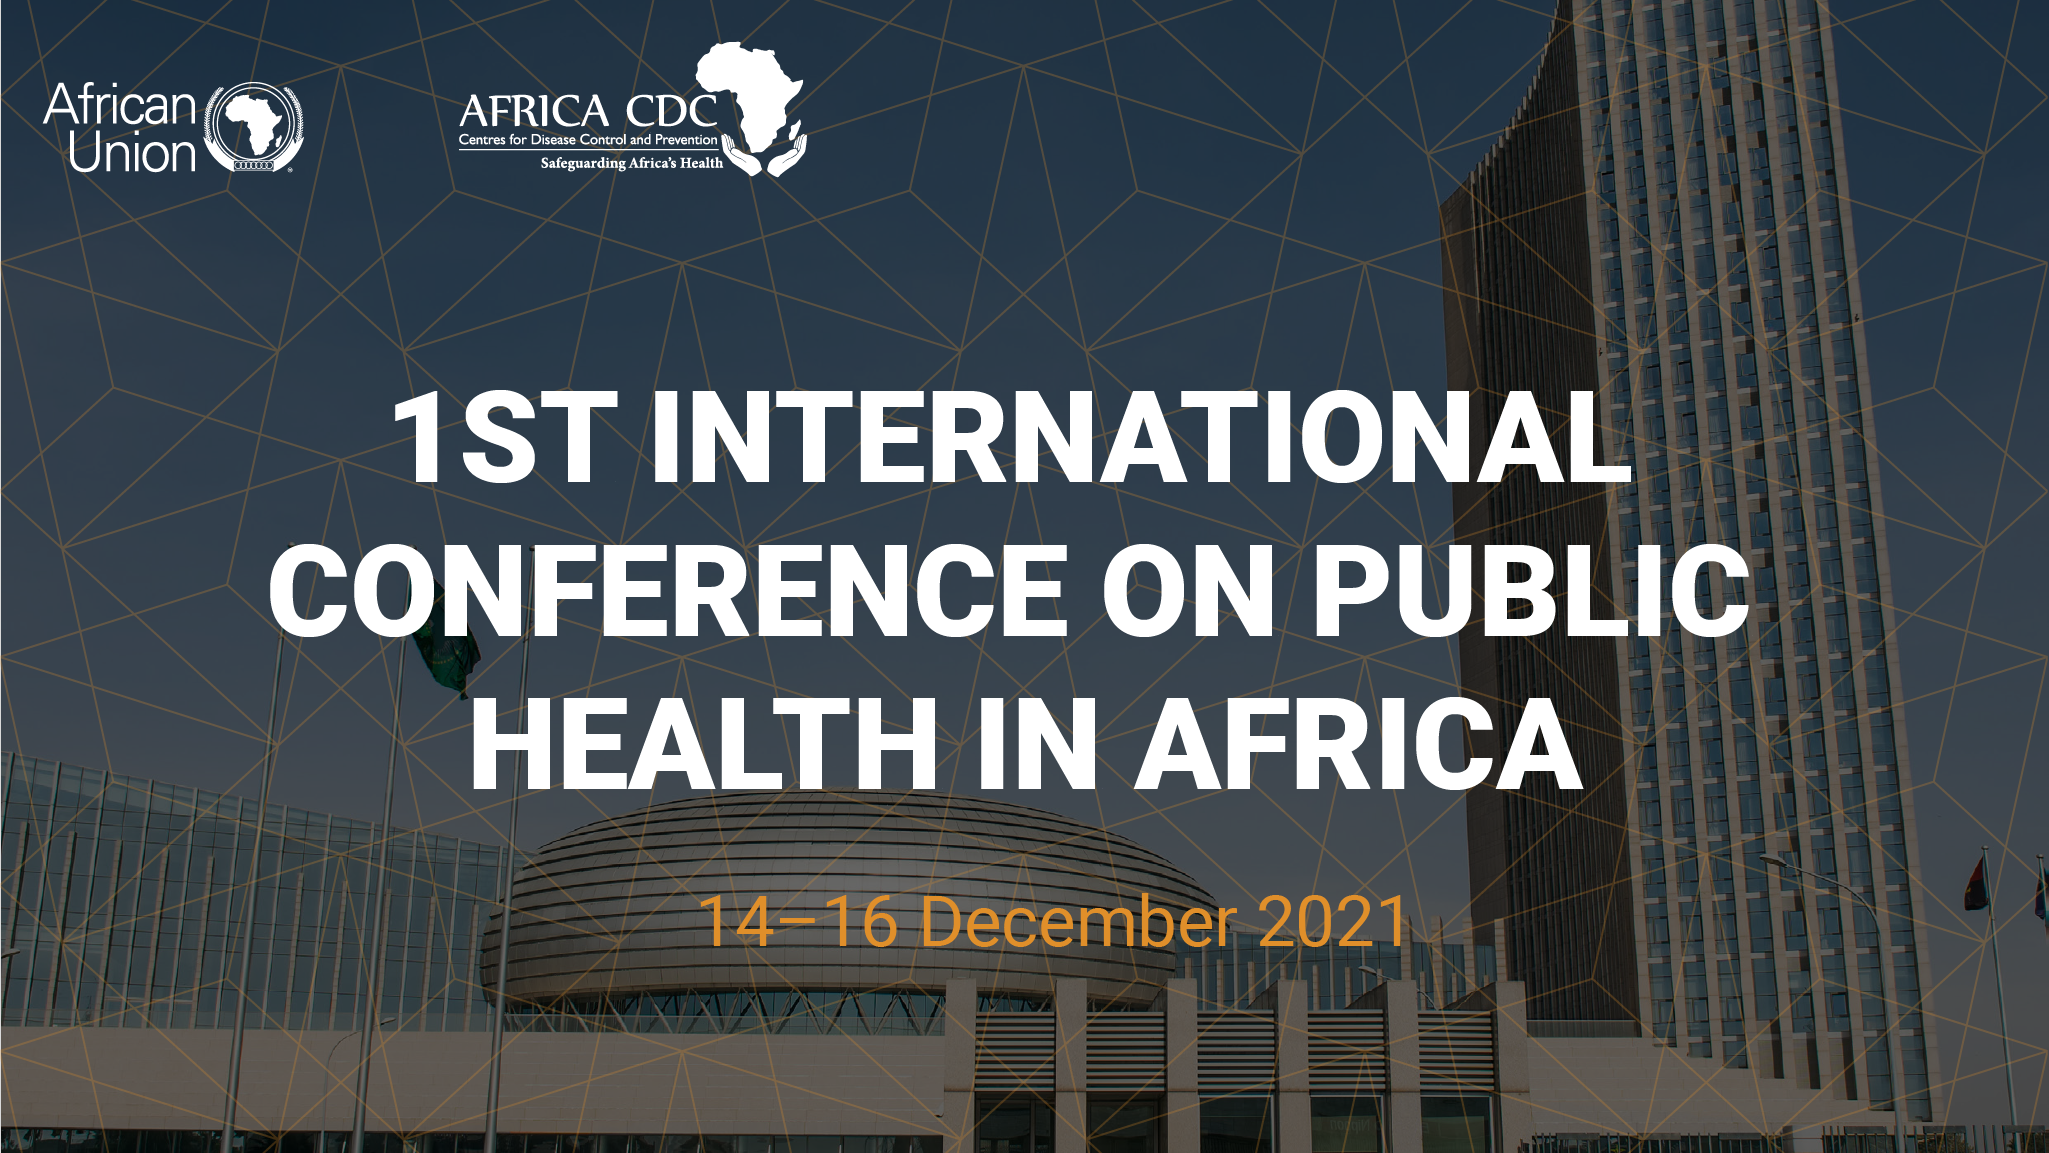 International Conference on Public Health in Africa CPHIA 2021